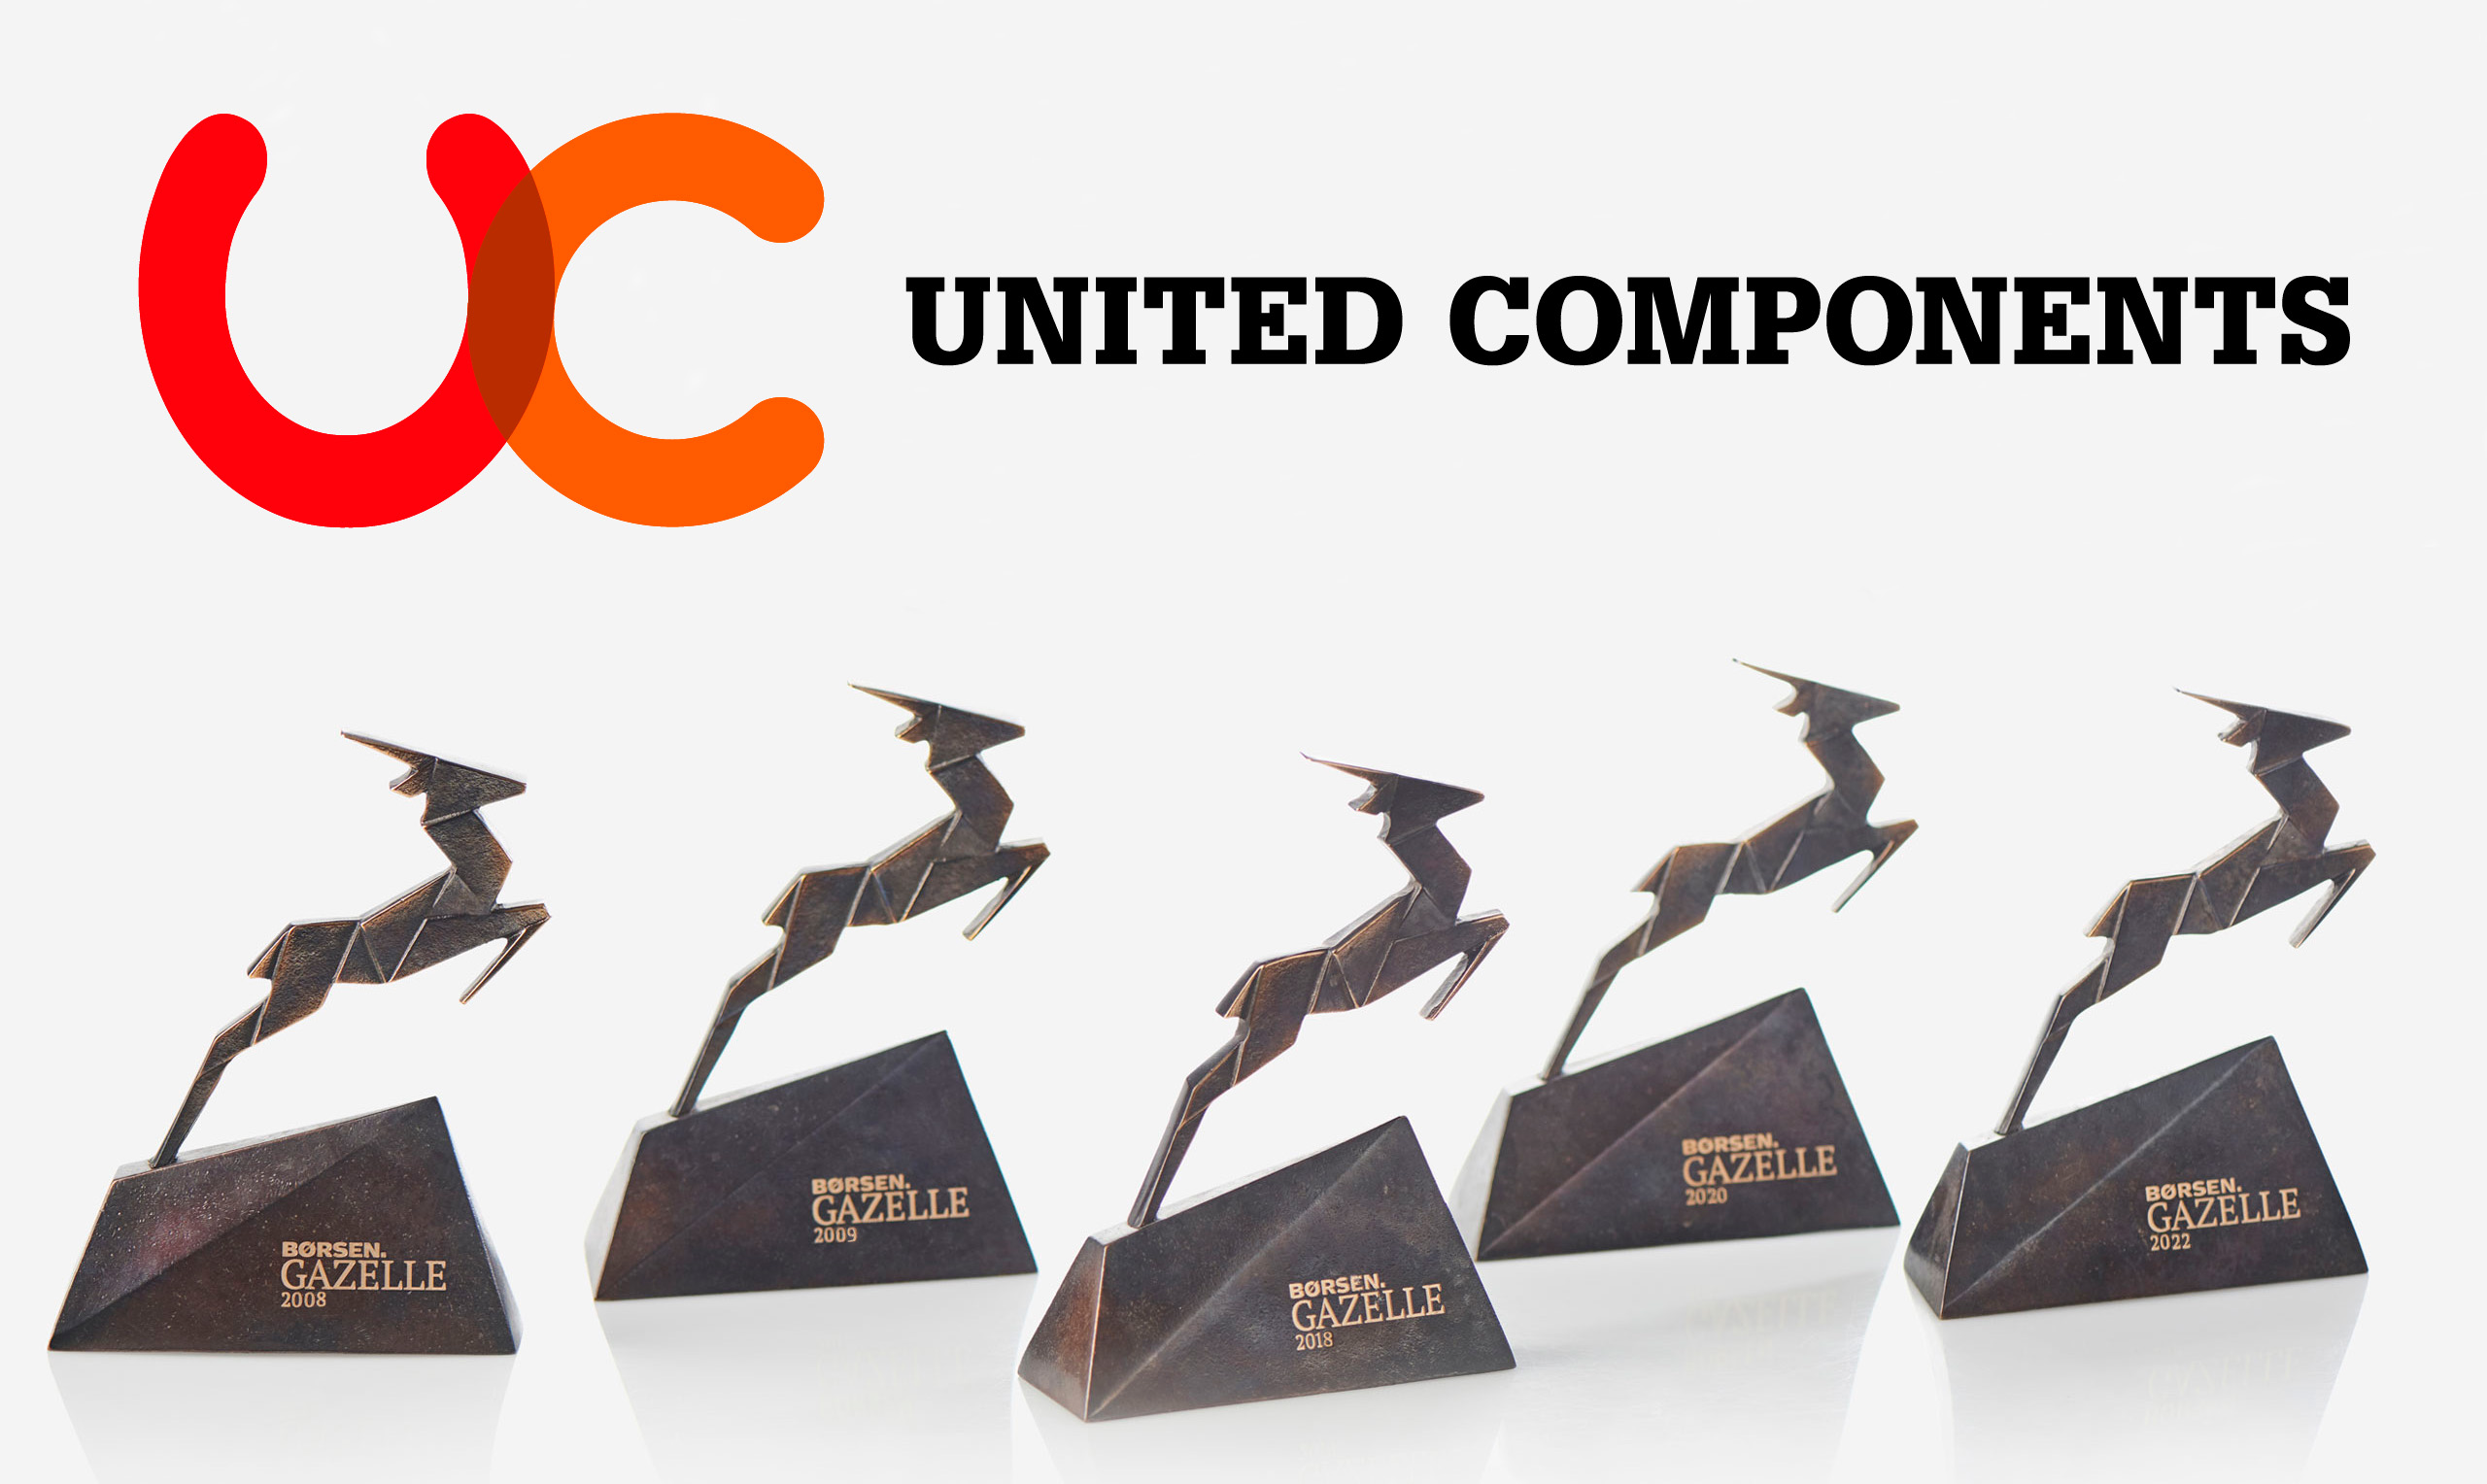 United components